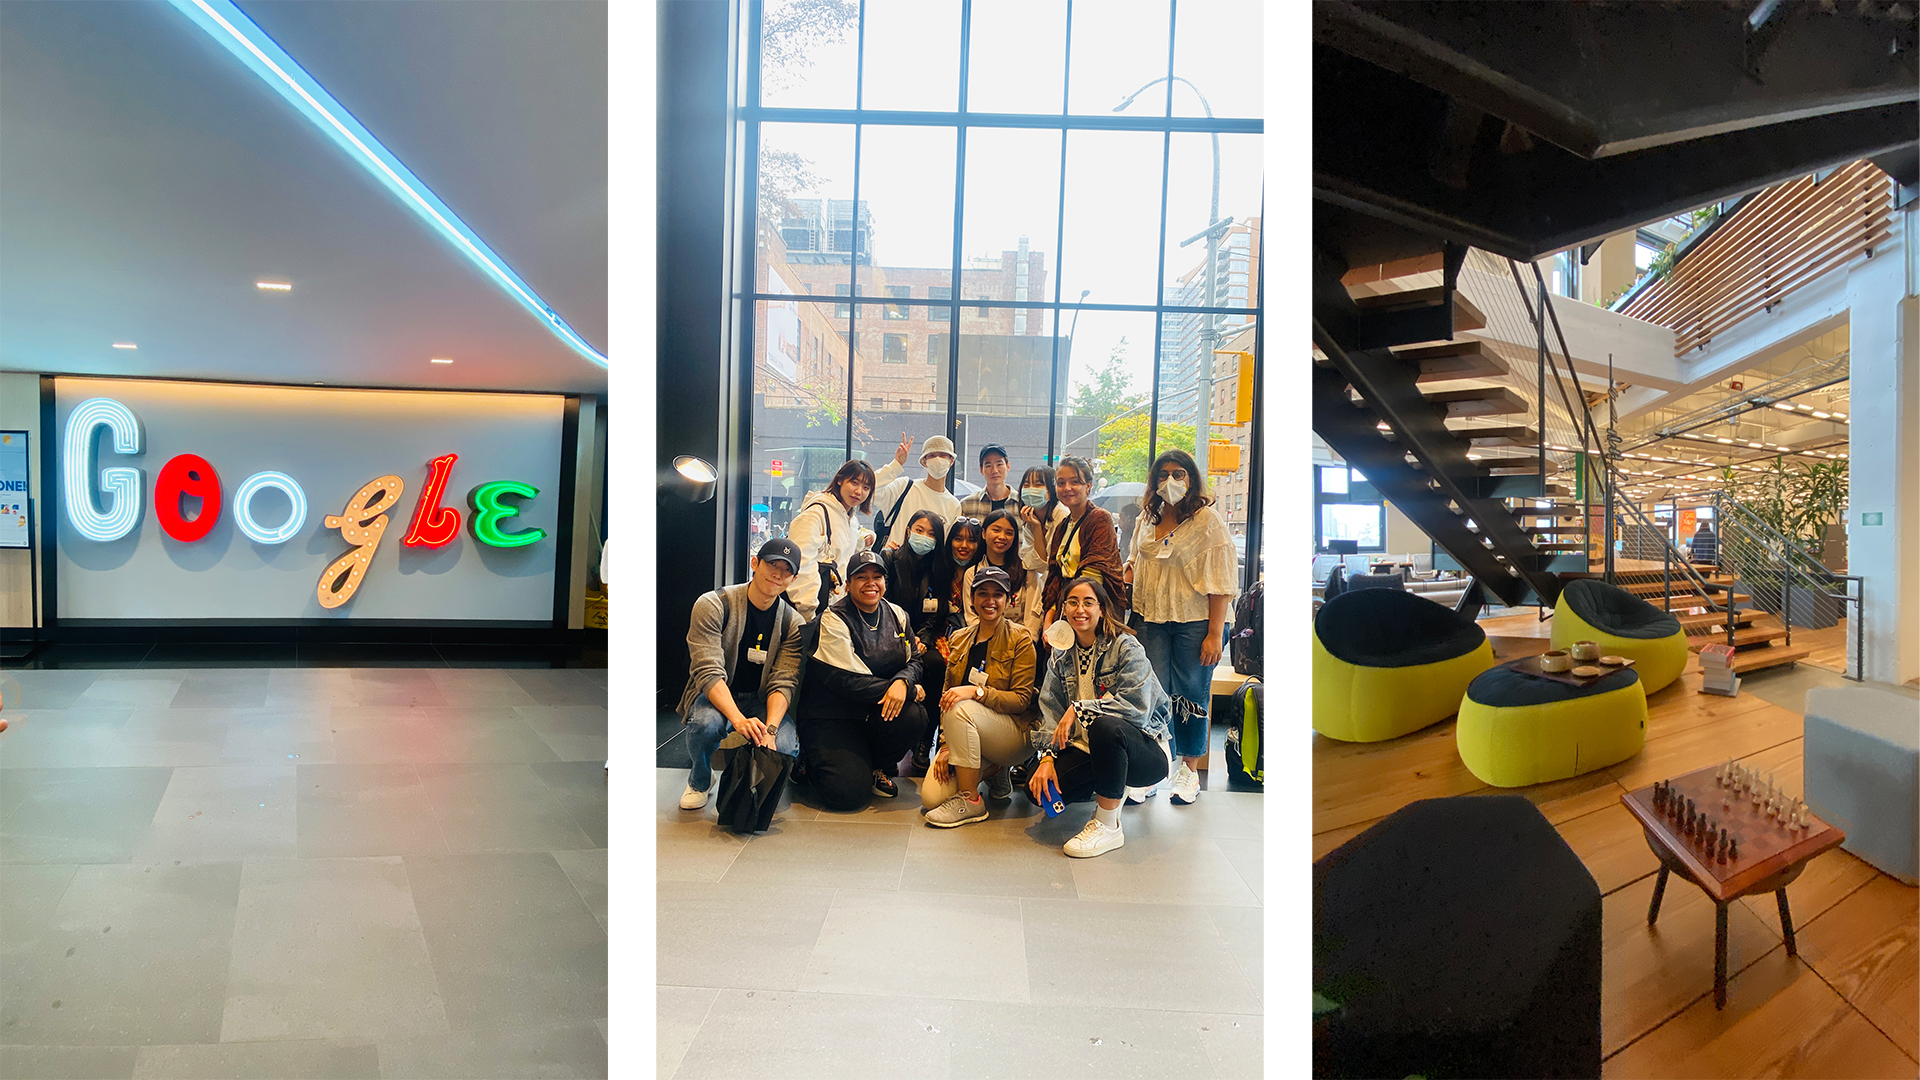 three photos from the visit to Google, showing the interior lobby, and a group photo of the students